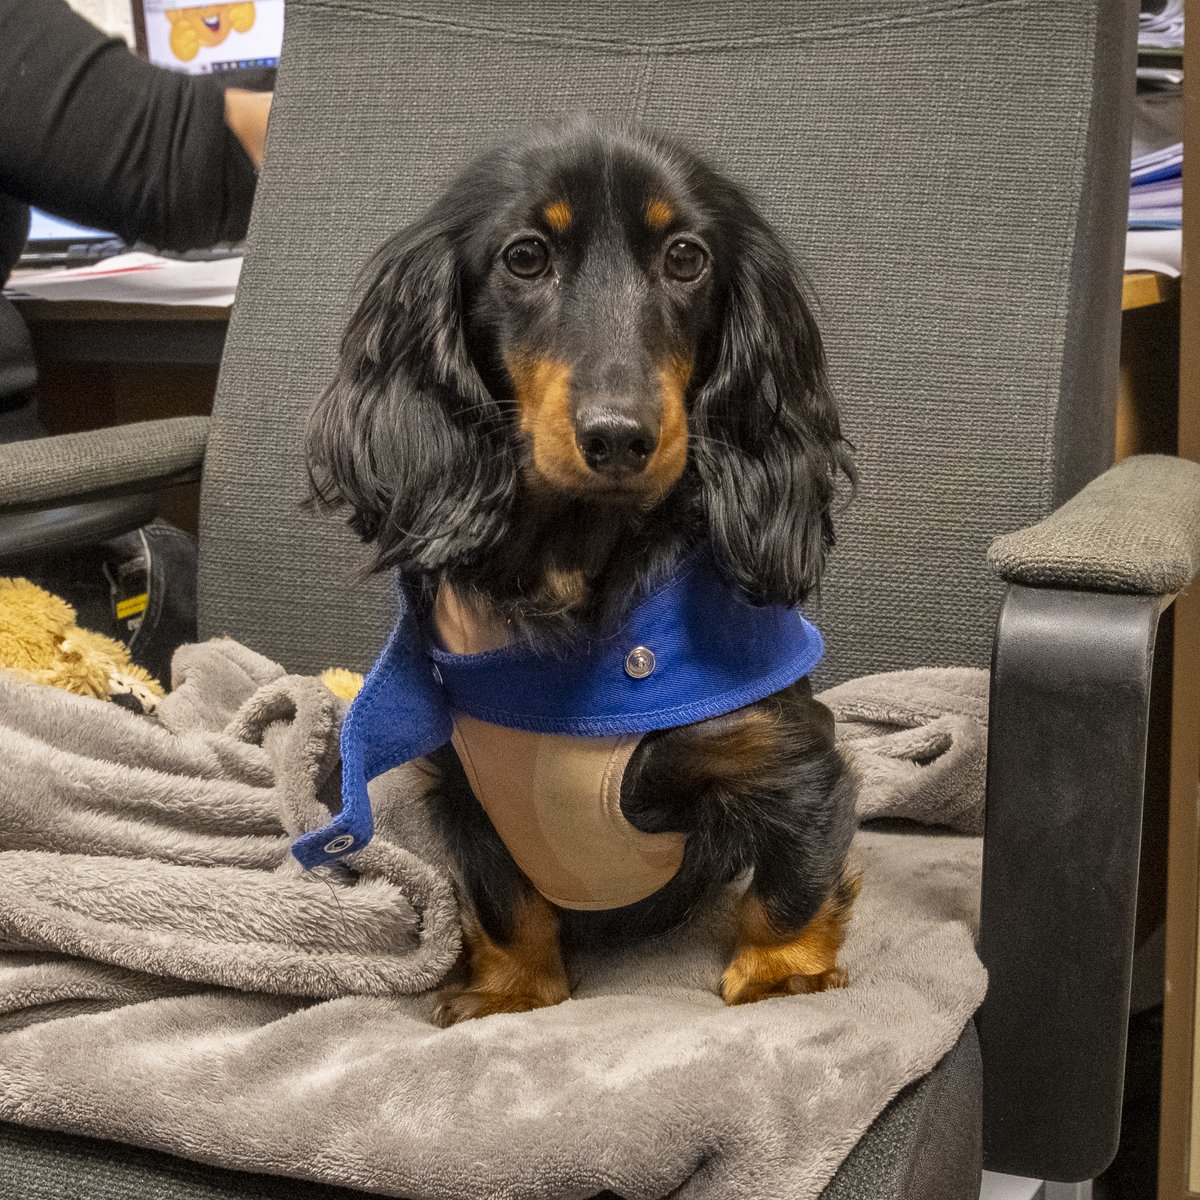 Sasha is ready with her work uniform as Chief Morale Officer ☺️ 😍

#PidcockMotorcycles #Dog #dogatwork